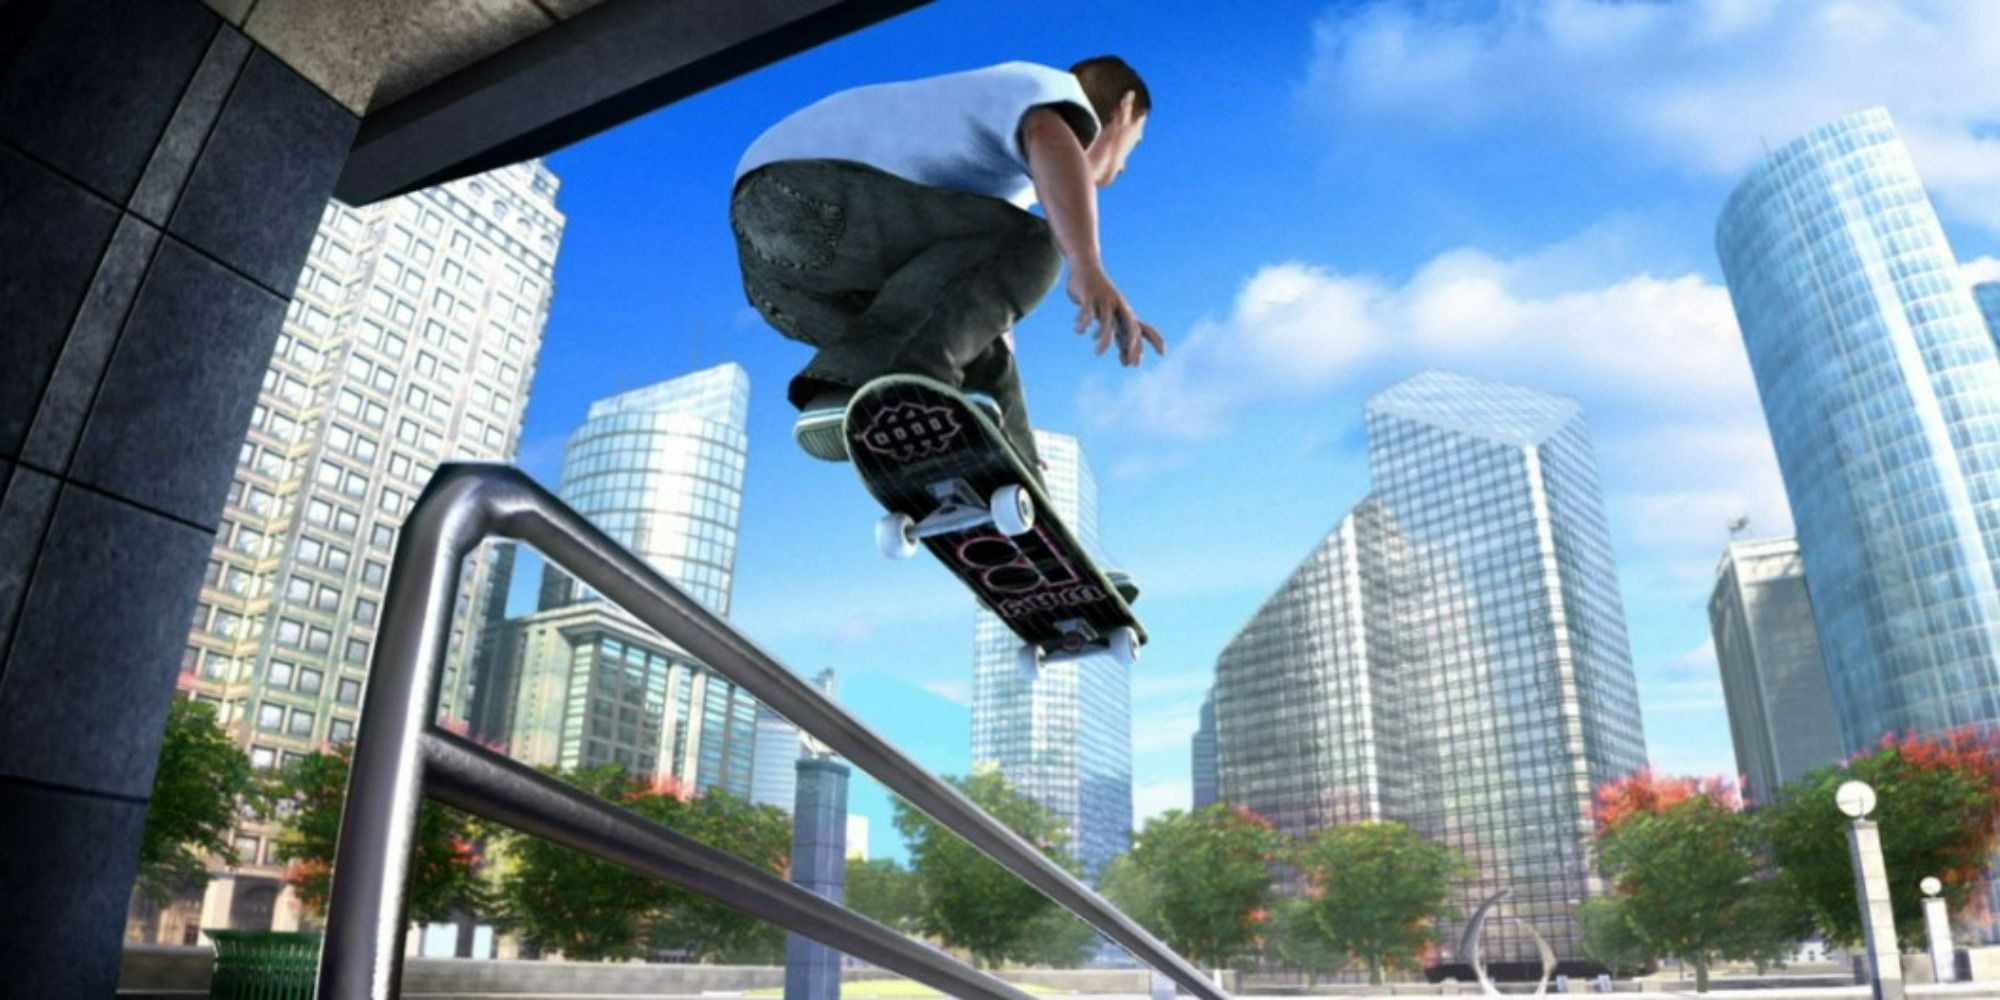 skater about to grind a rail in cityscape in skate